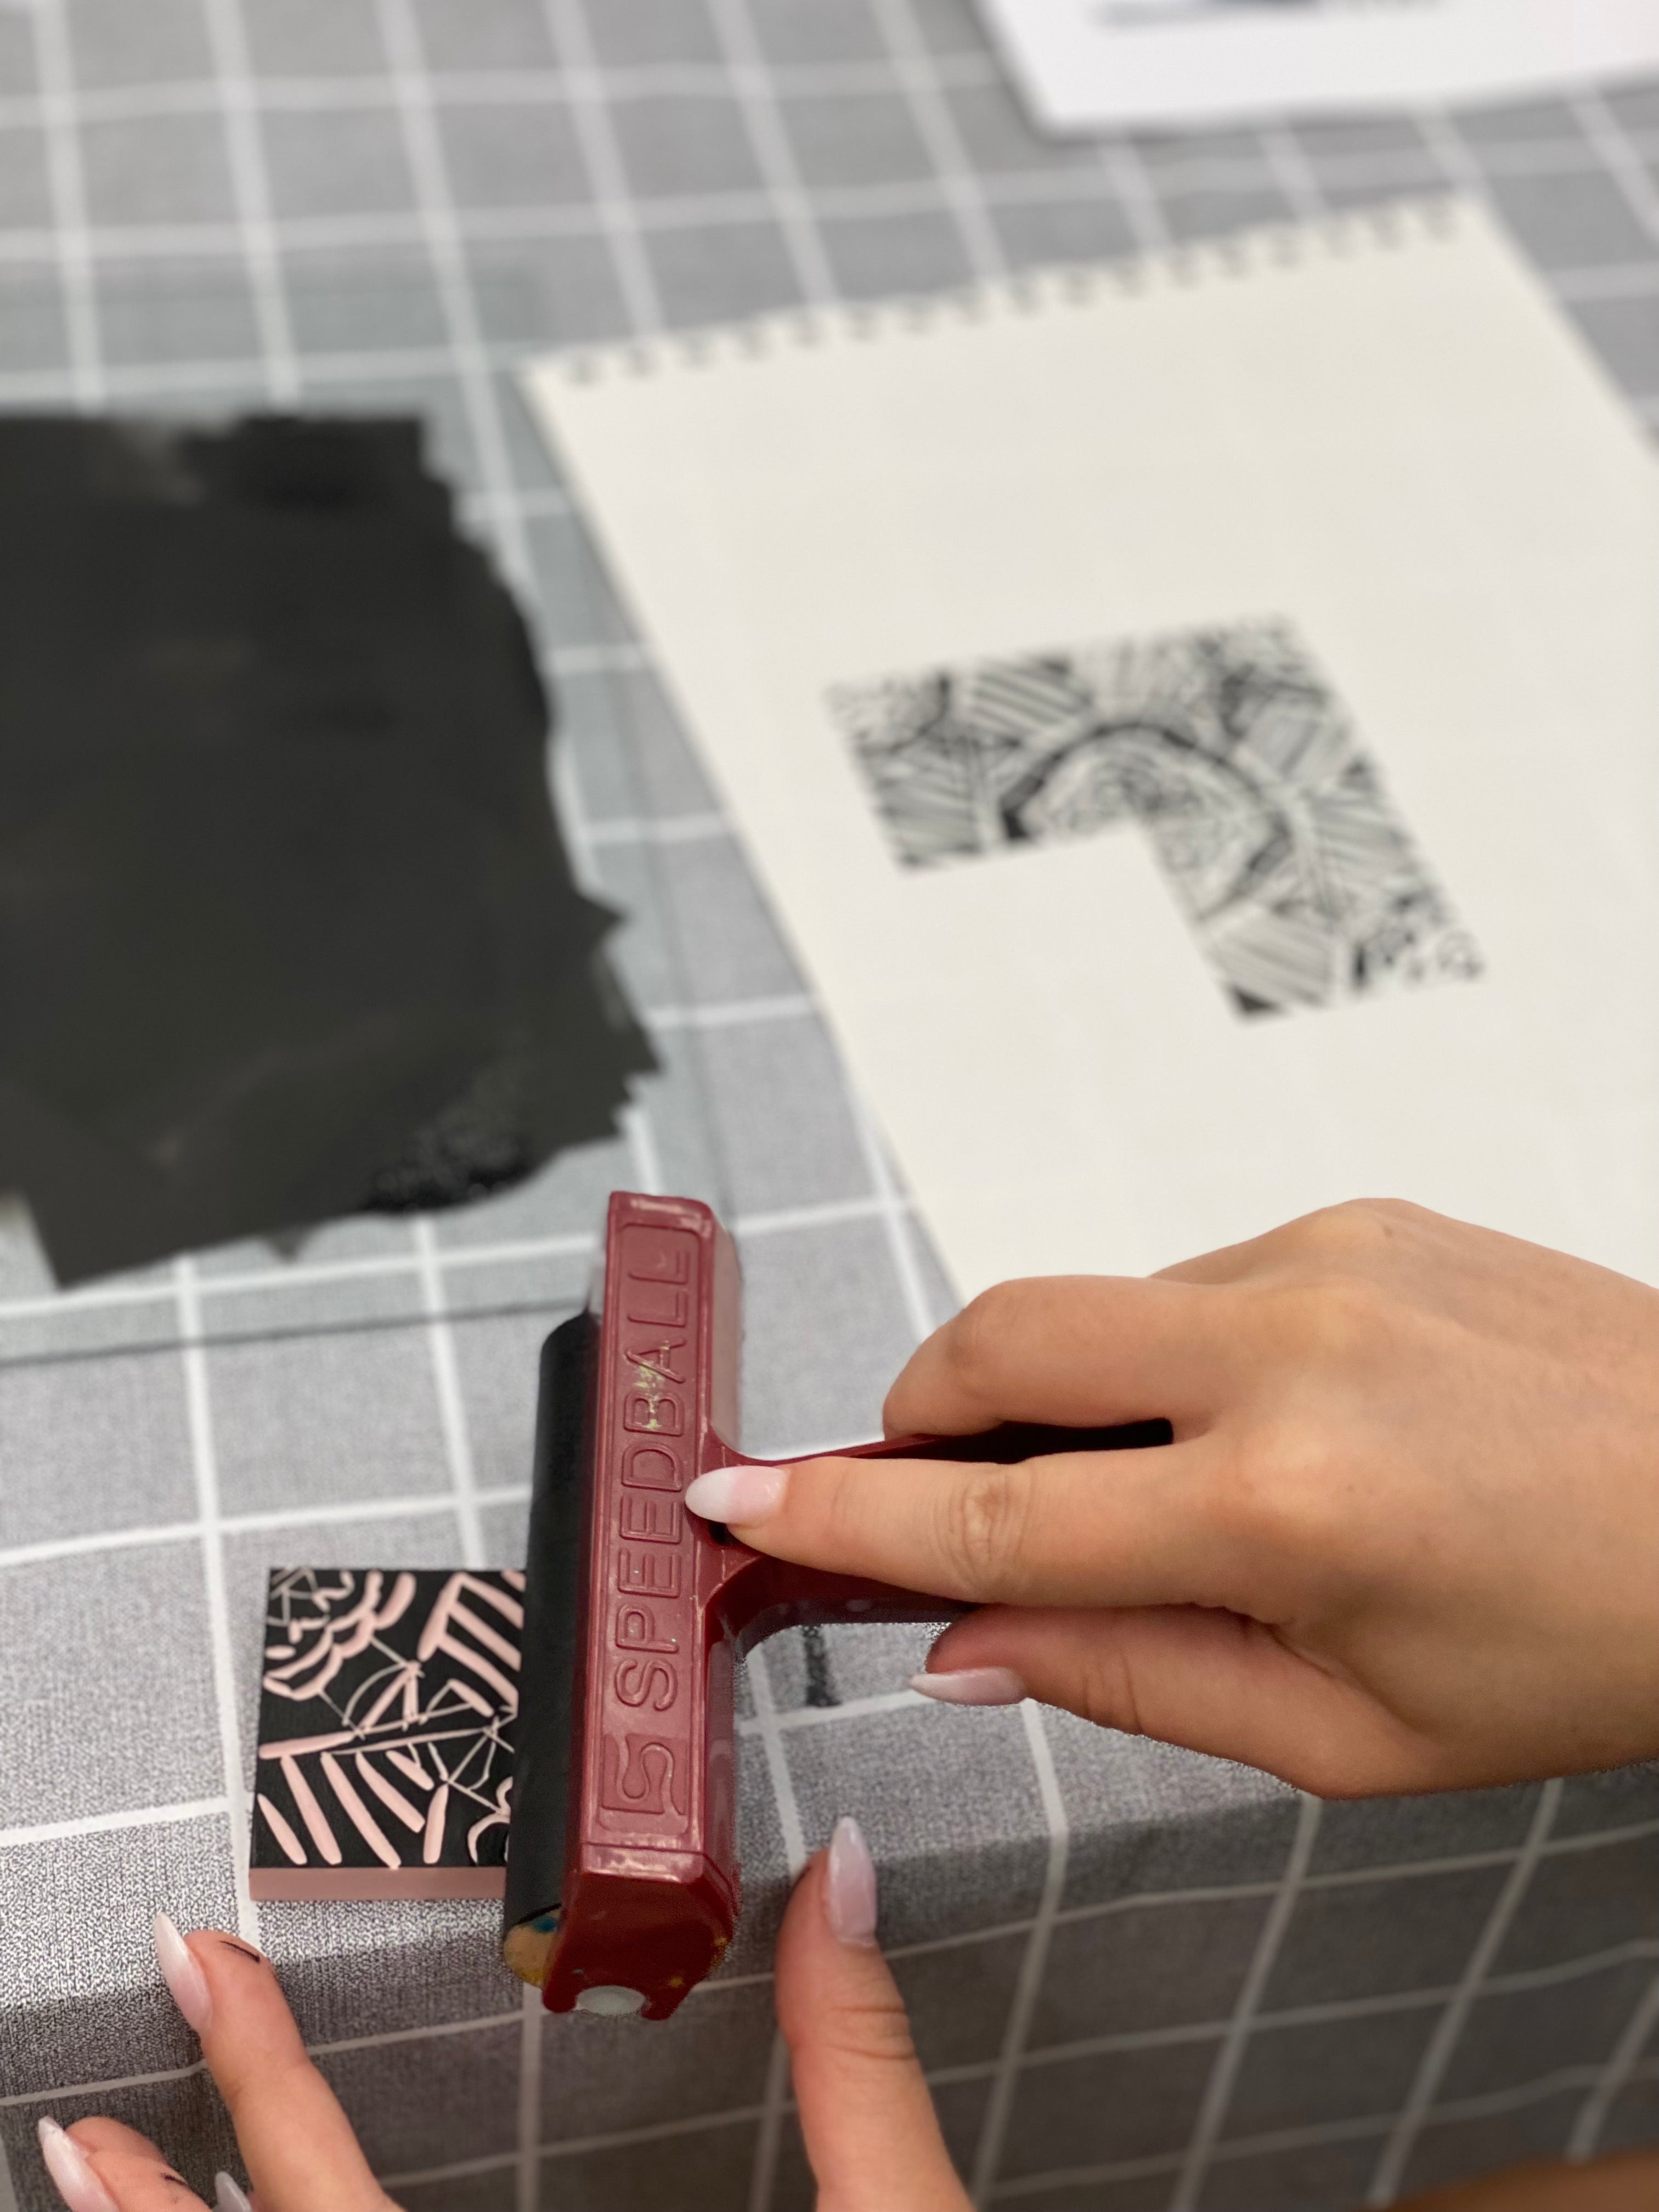 OCT 20th IN-PERSON - Block Printing with Thunder Textile